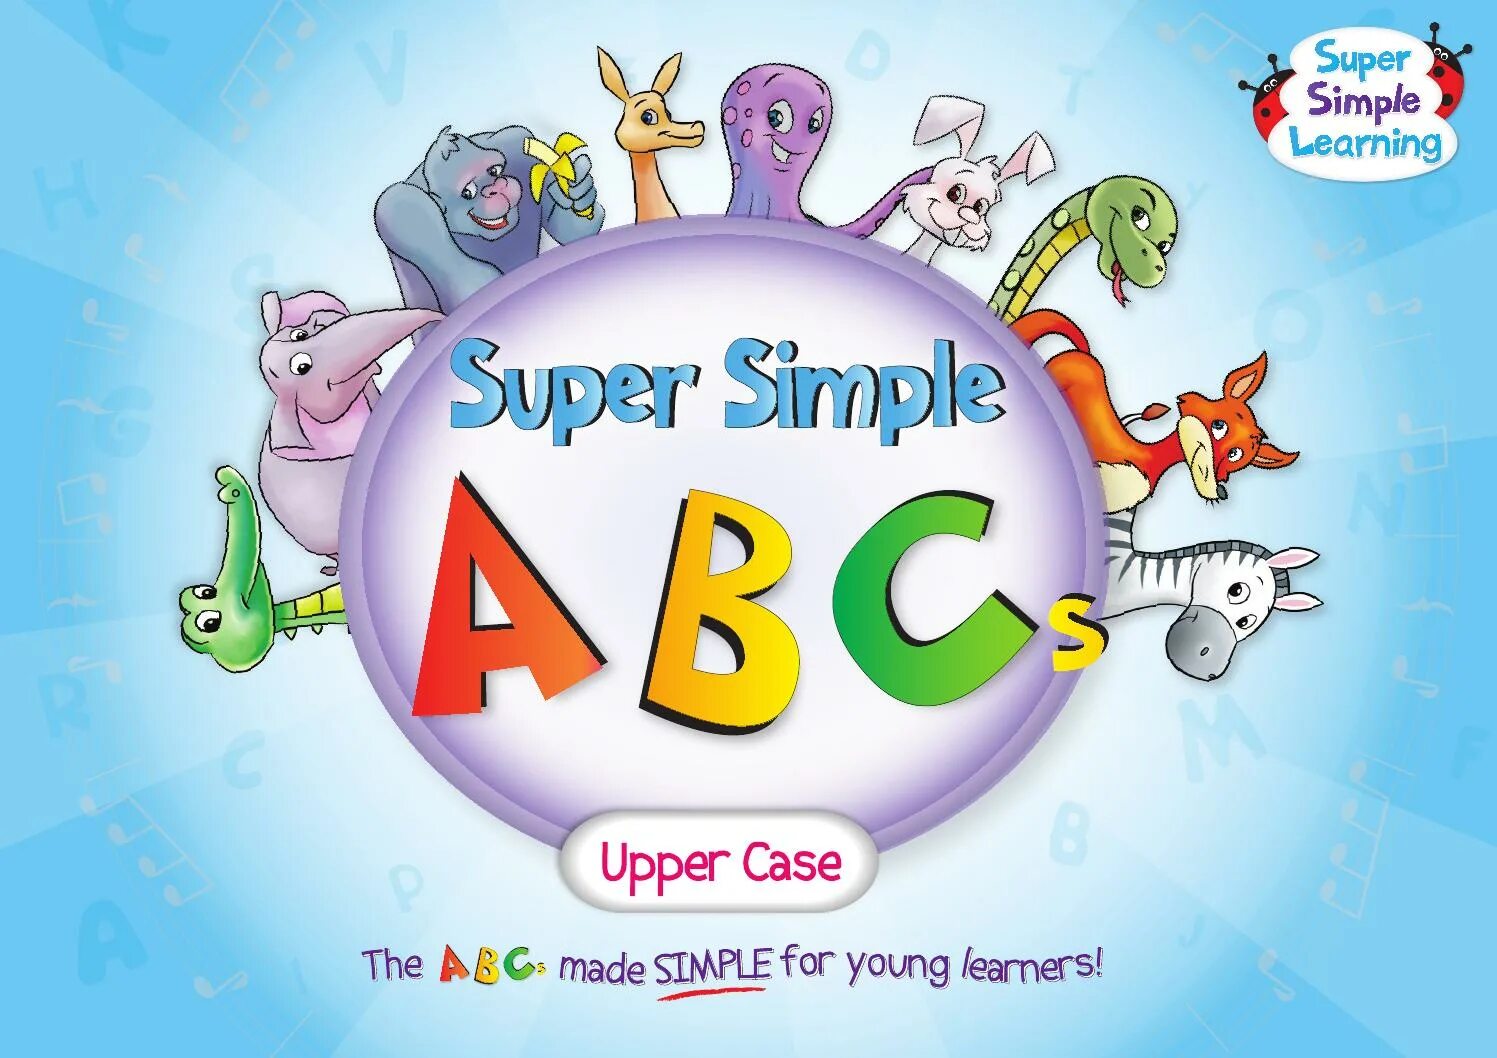 Simply learning. Супер Симпл Сонгс. Super simple ABC. ABC Song for Kids super simple. Super simple Songs.